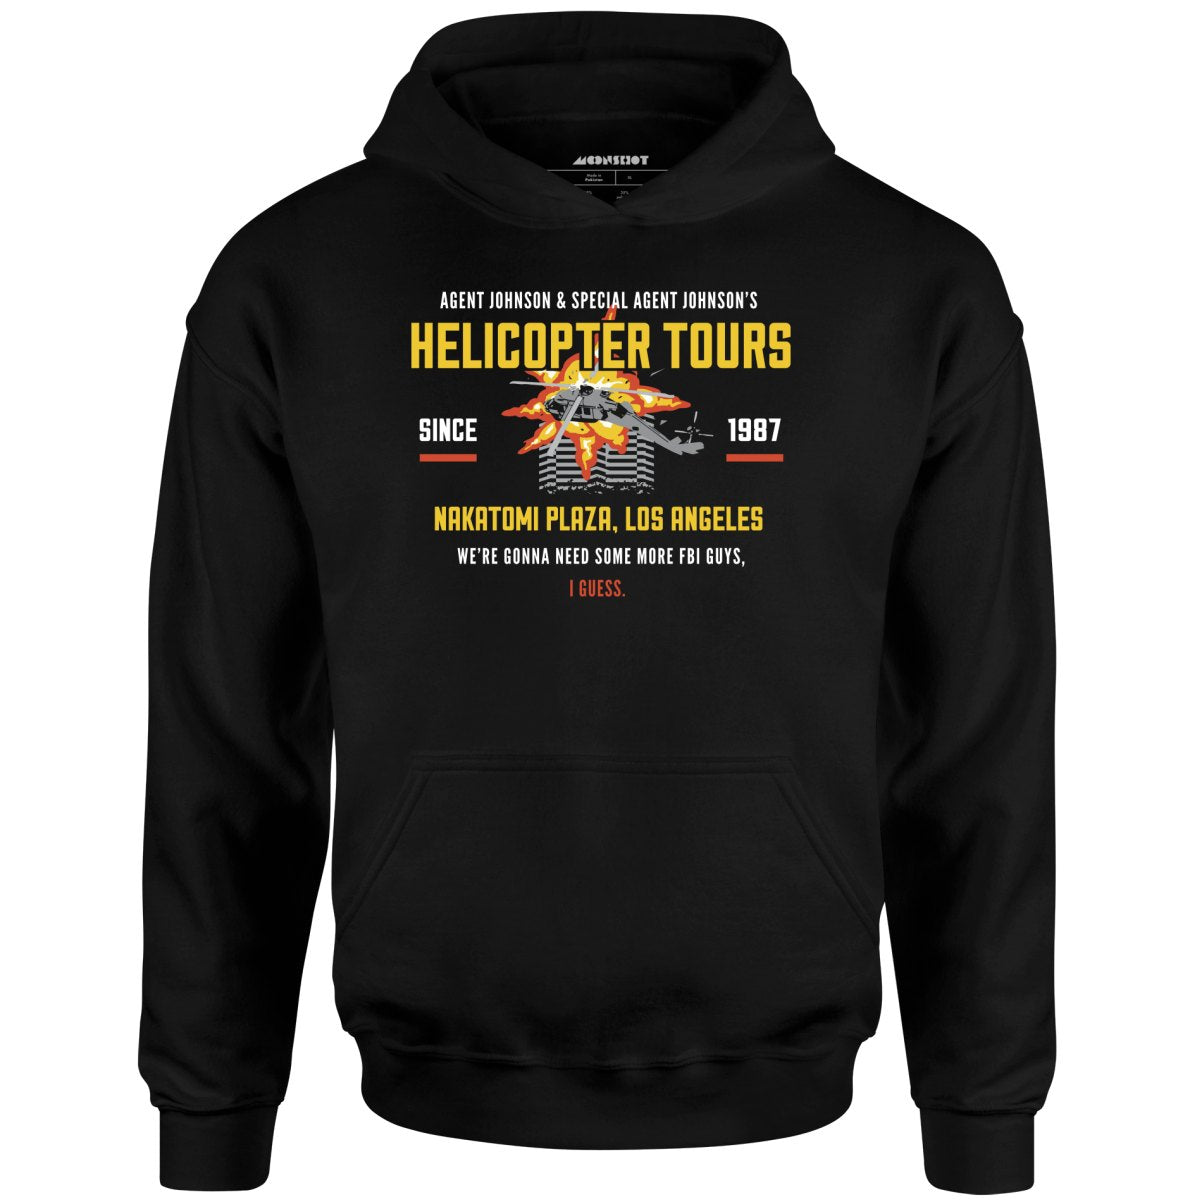 Agent Johnson & Johnson's Helicopter Tours - Die Hard - Unisex Hoodie